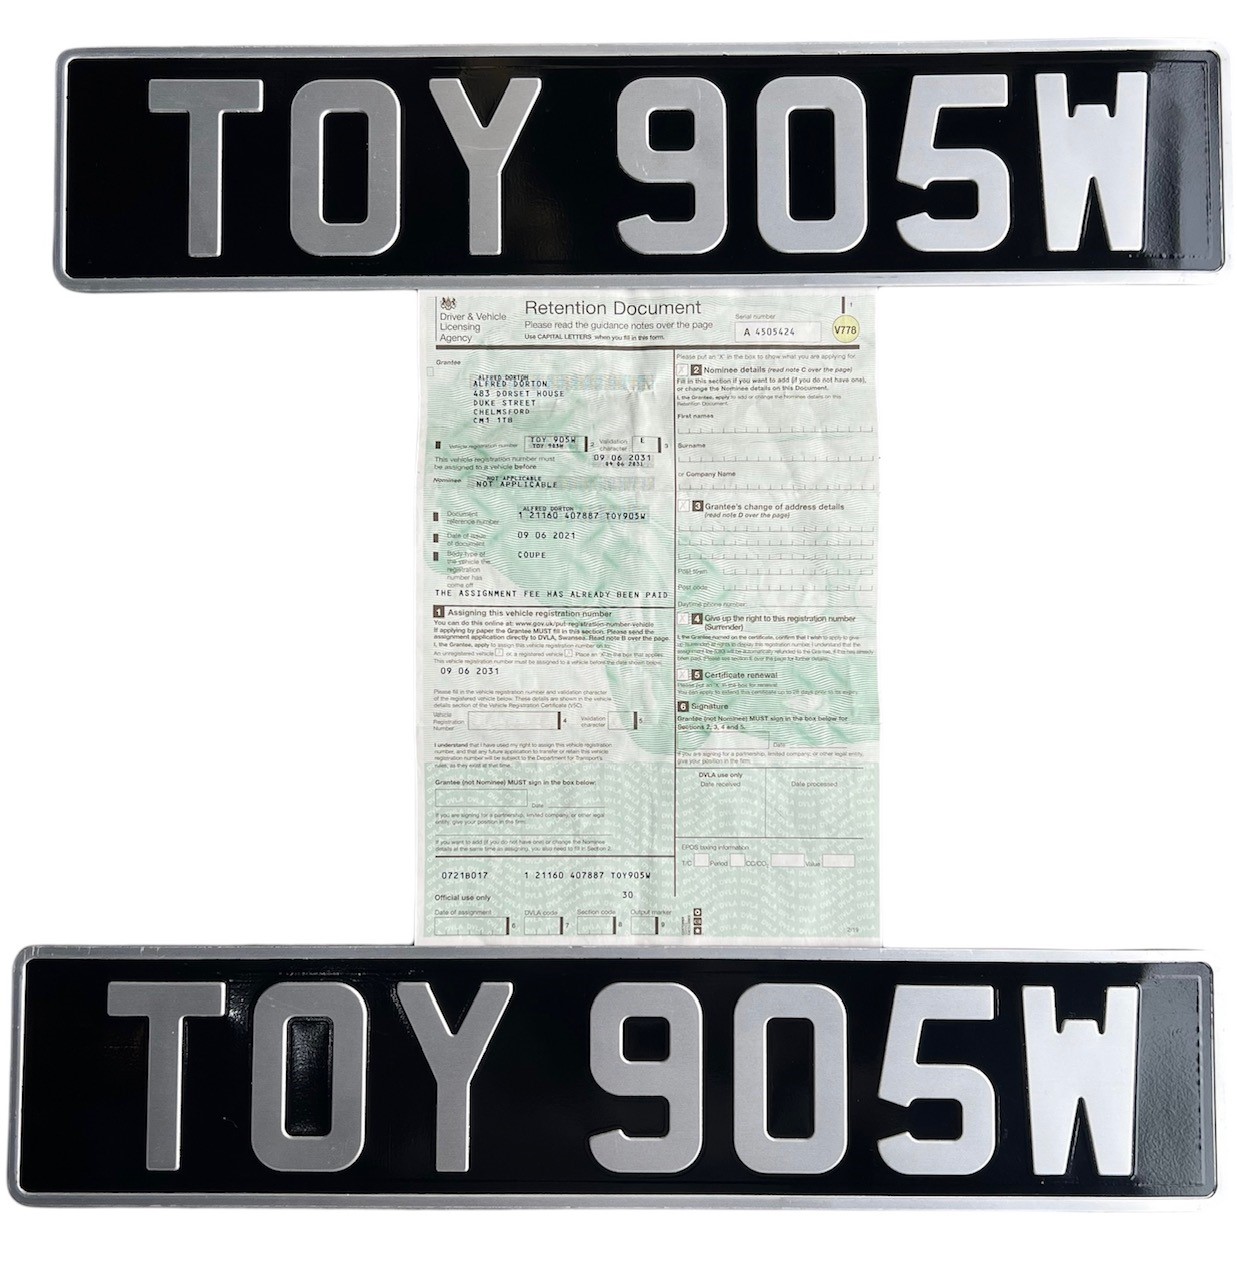 TOY 905W, VEHICLE REGISTRATION NUMBER With retention document.